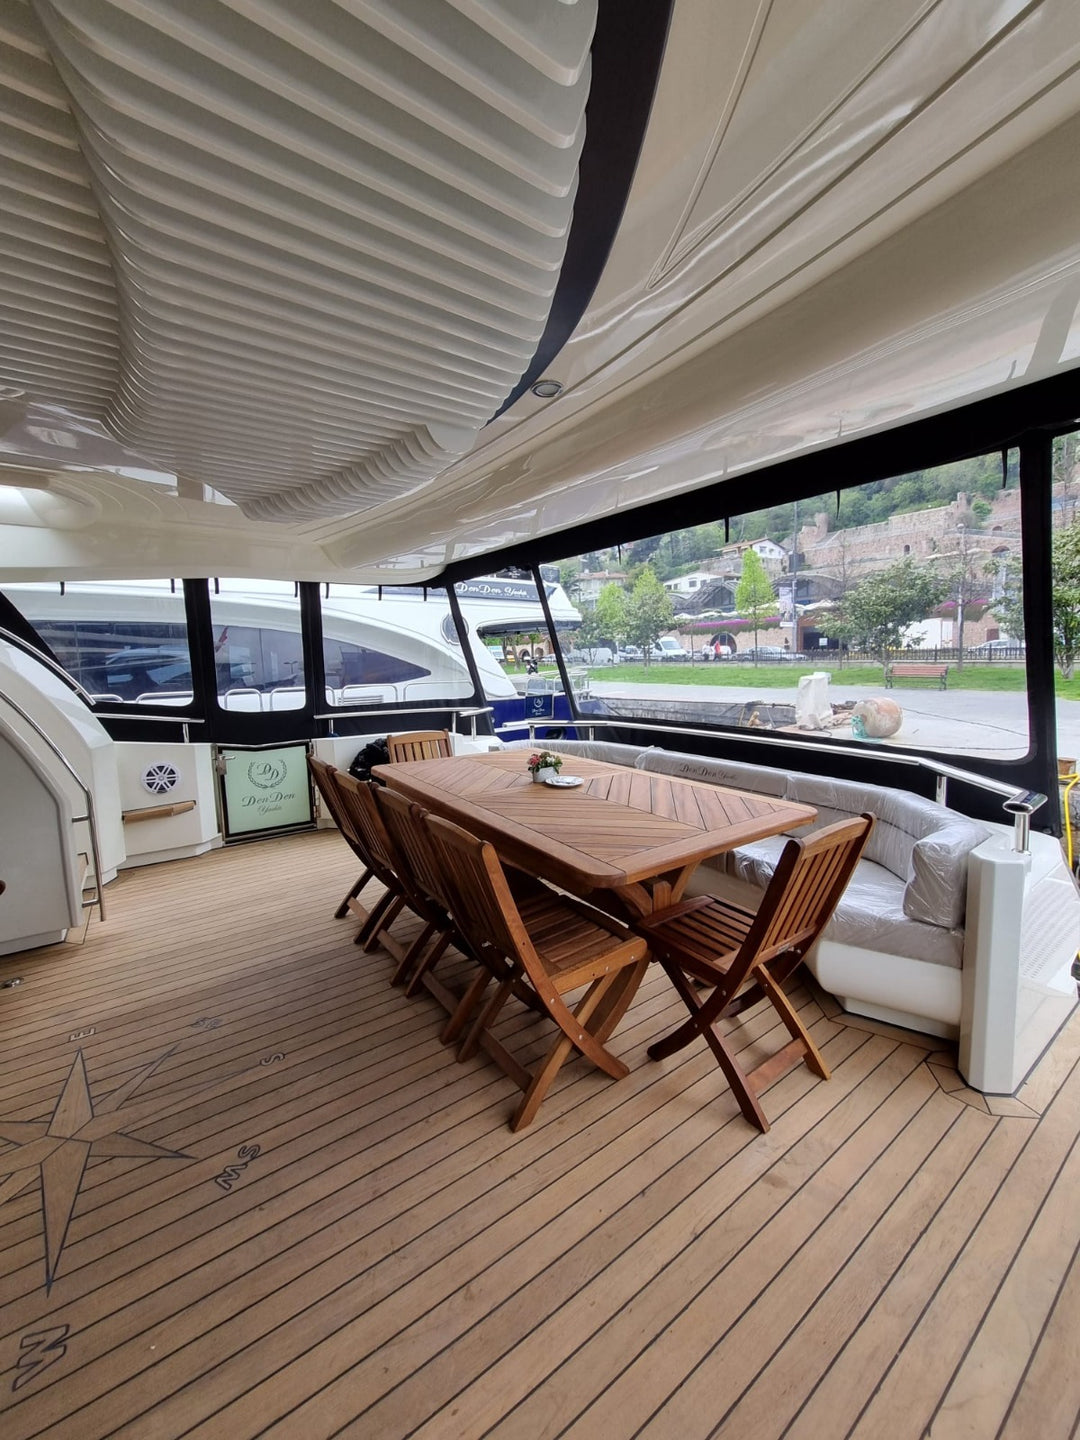 Guests basking in the sun on the yacht's spacious decks, immersed in luxury and Istanbul’s scenic beauty.